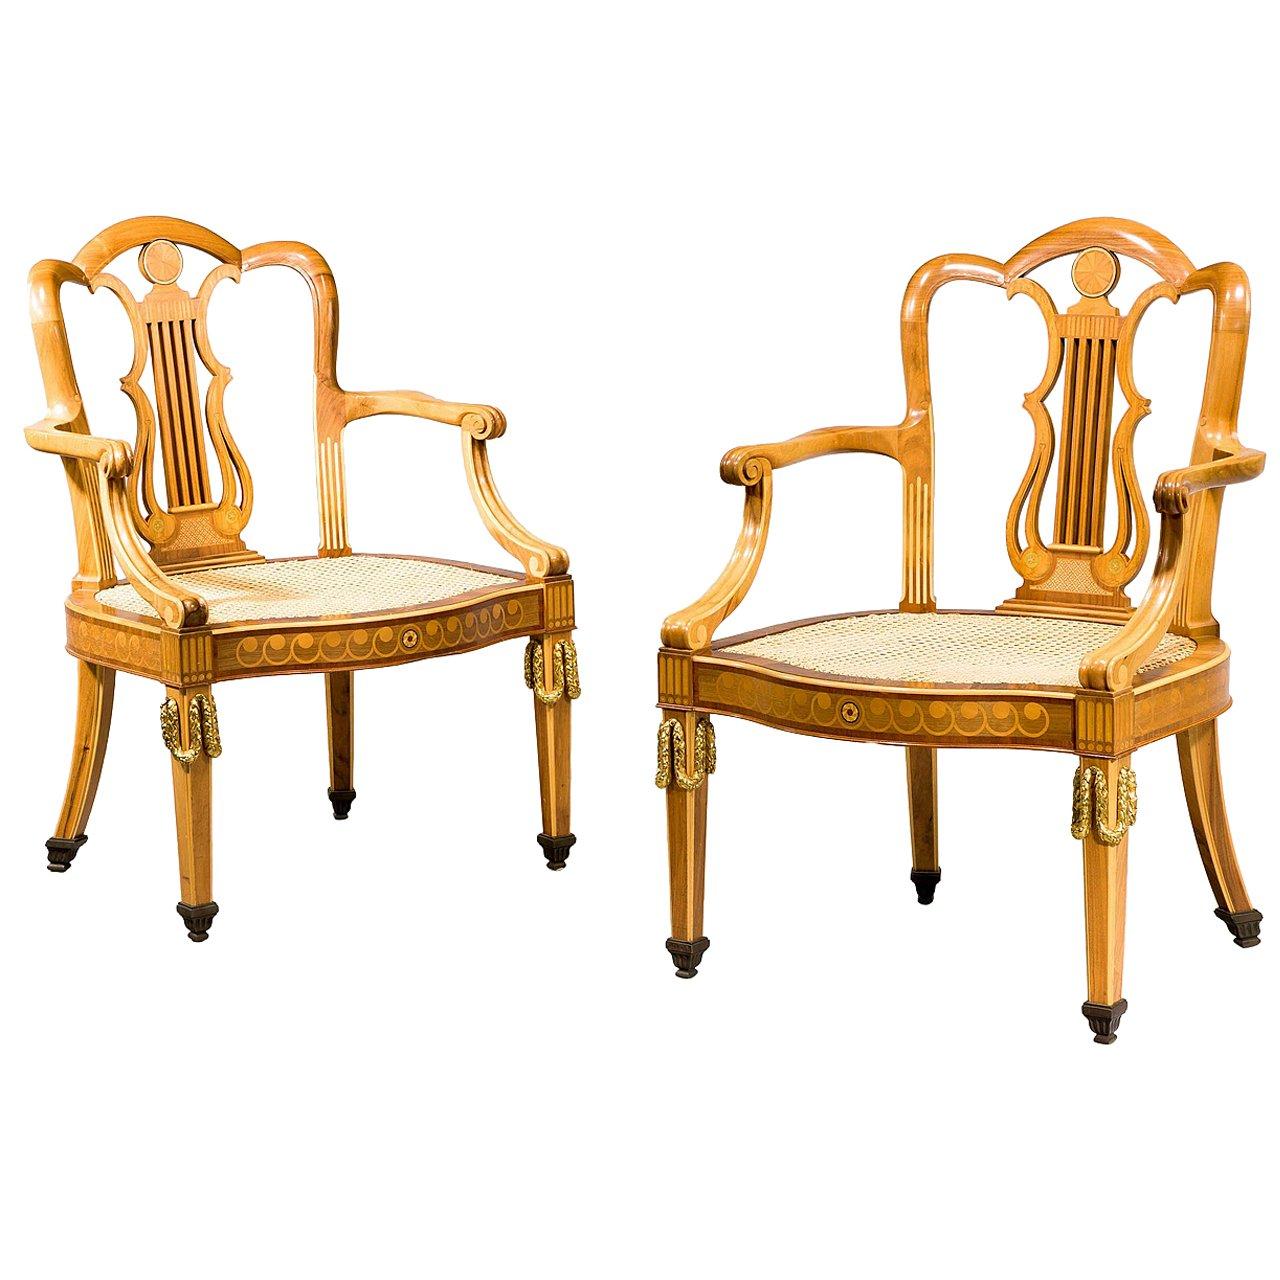 Pair of Early 20th Century Elbow Chairs